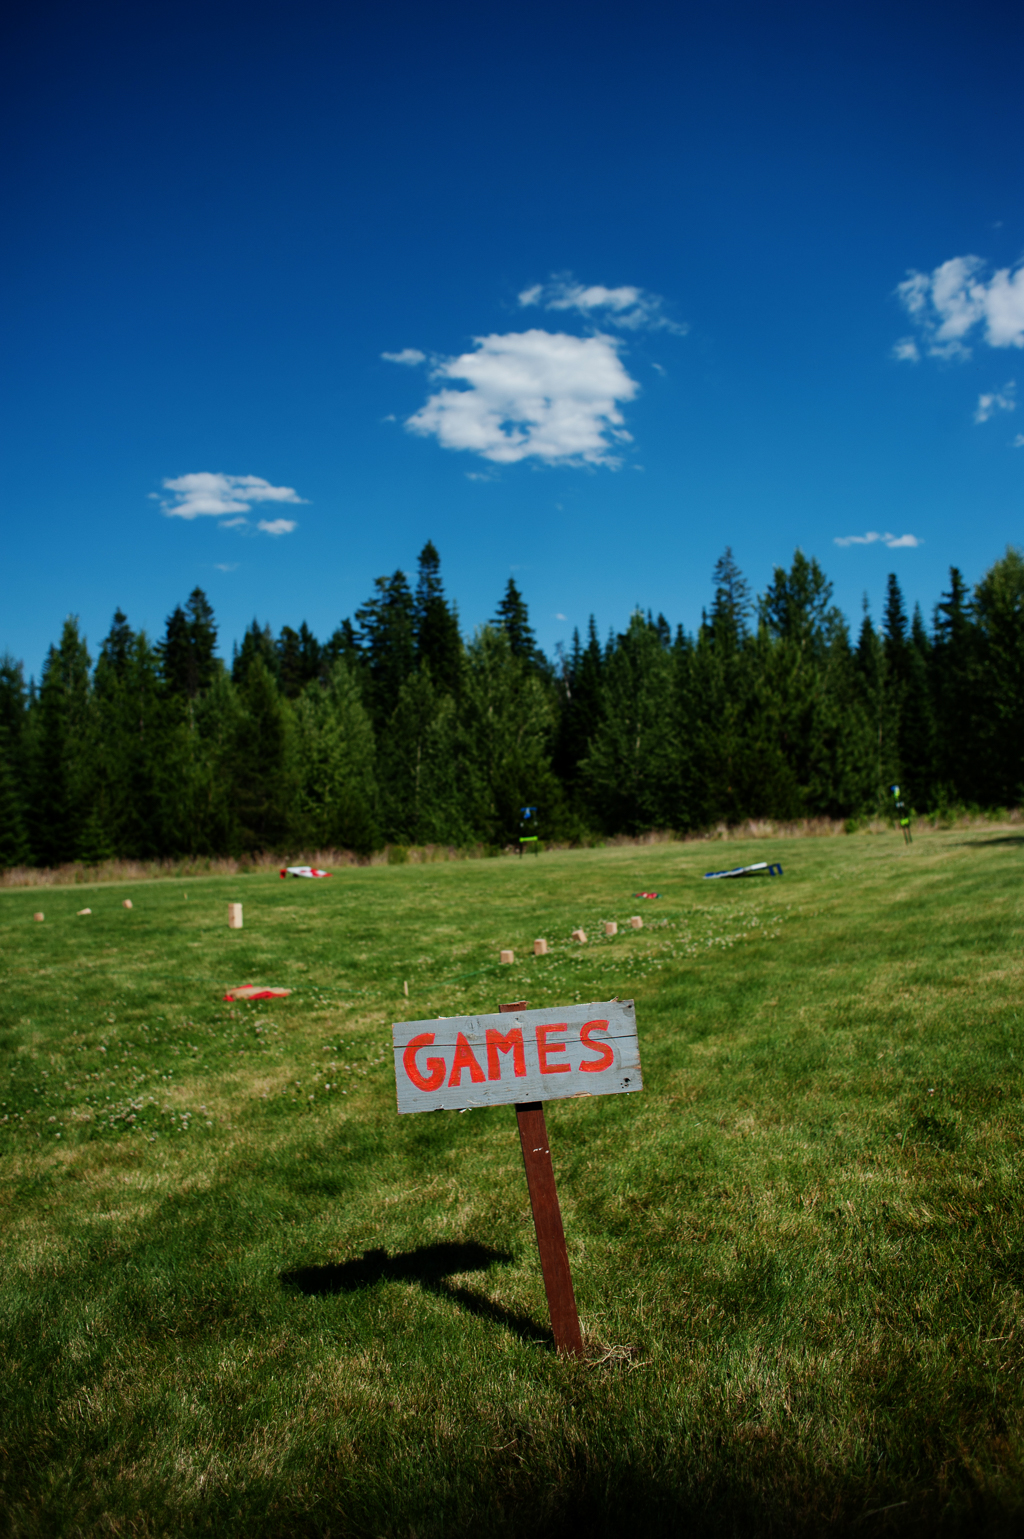 a cute sign that says games in the lawn